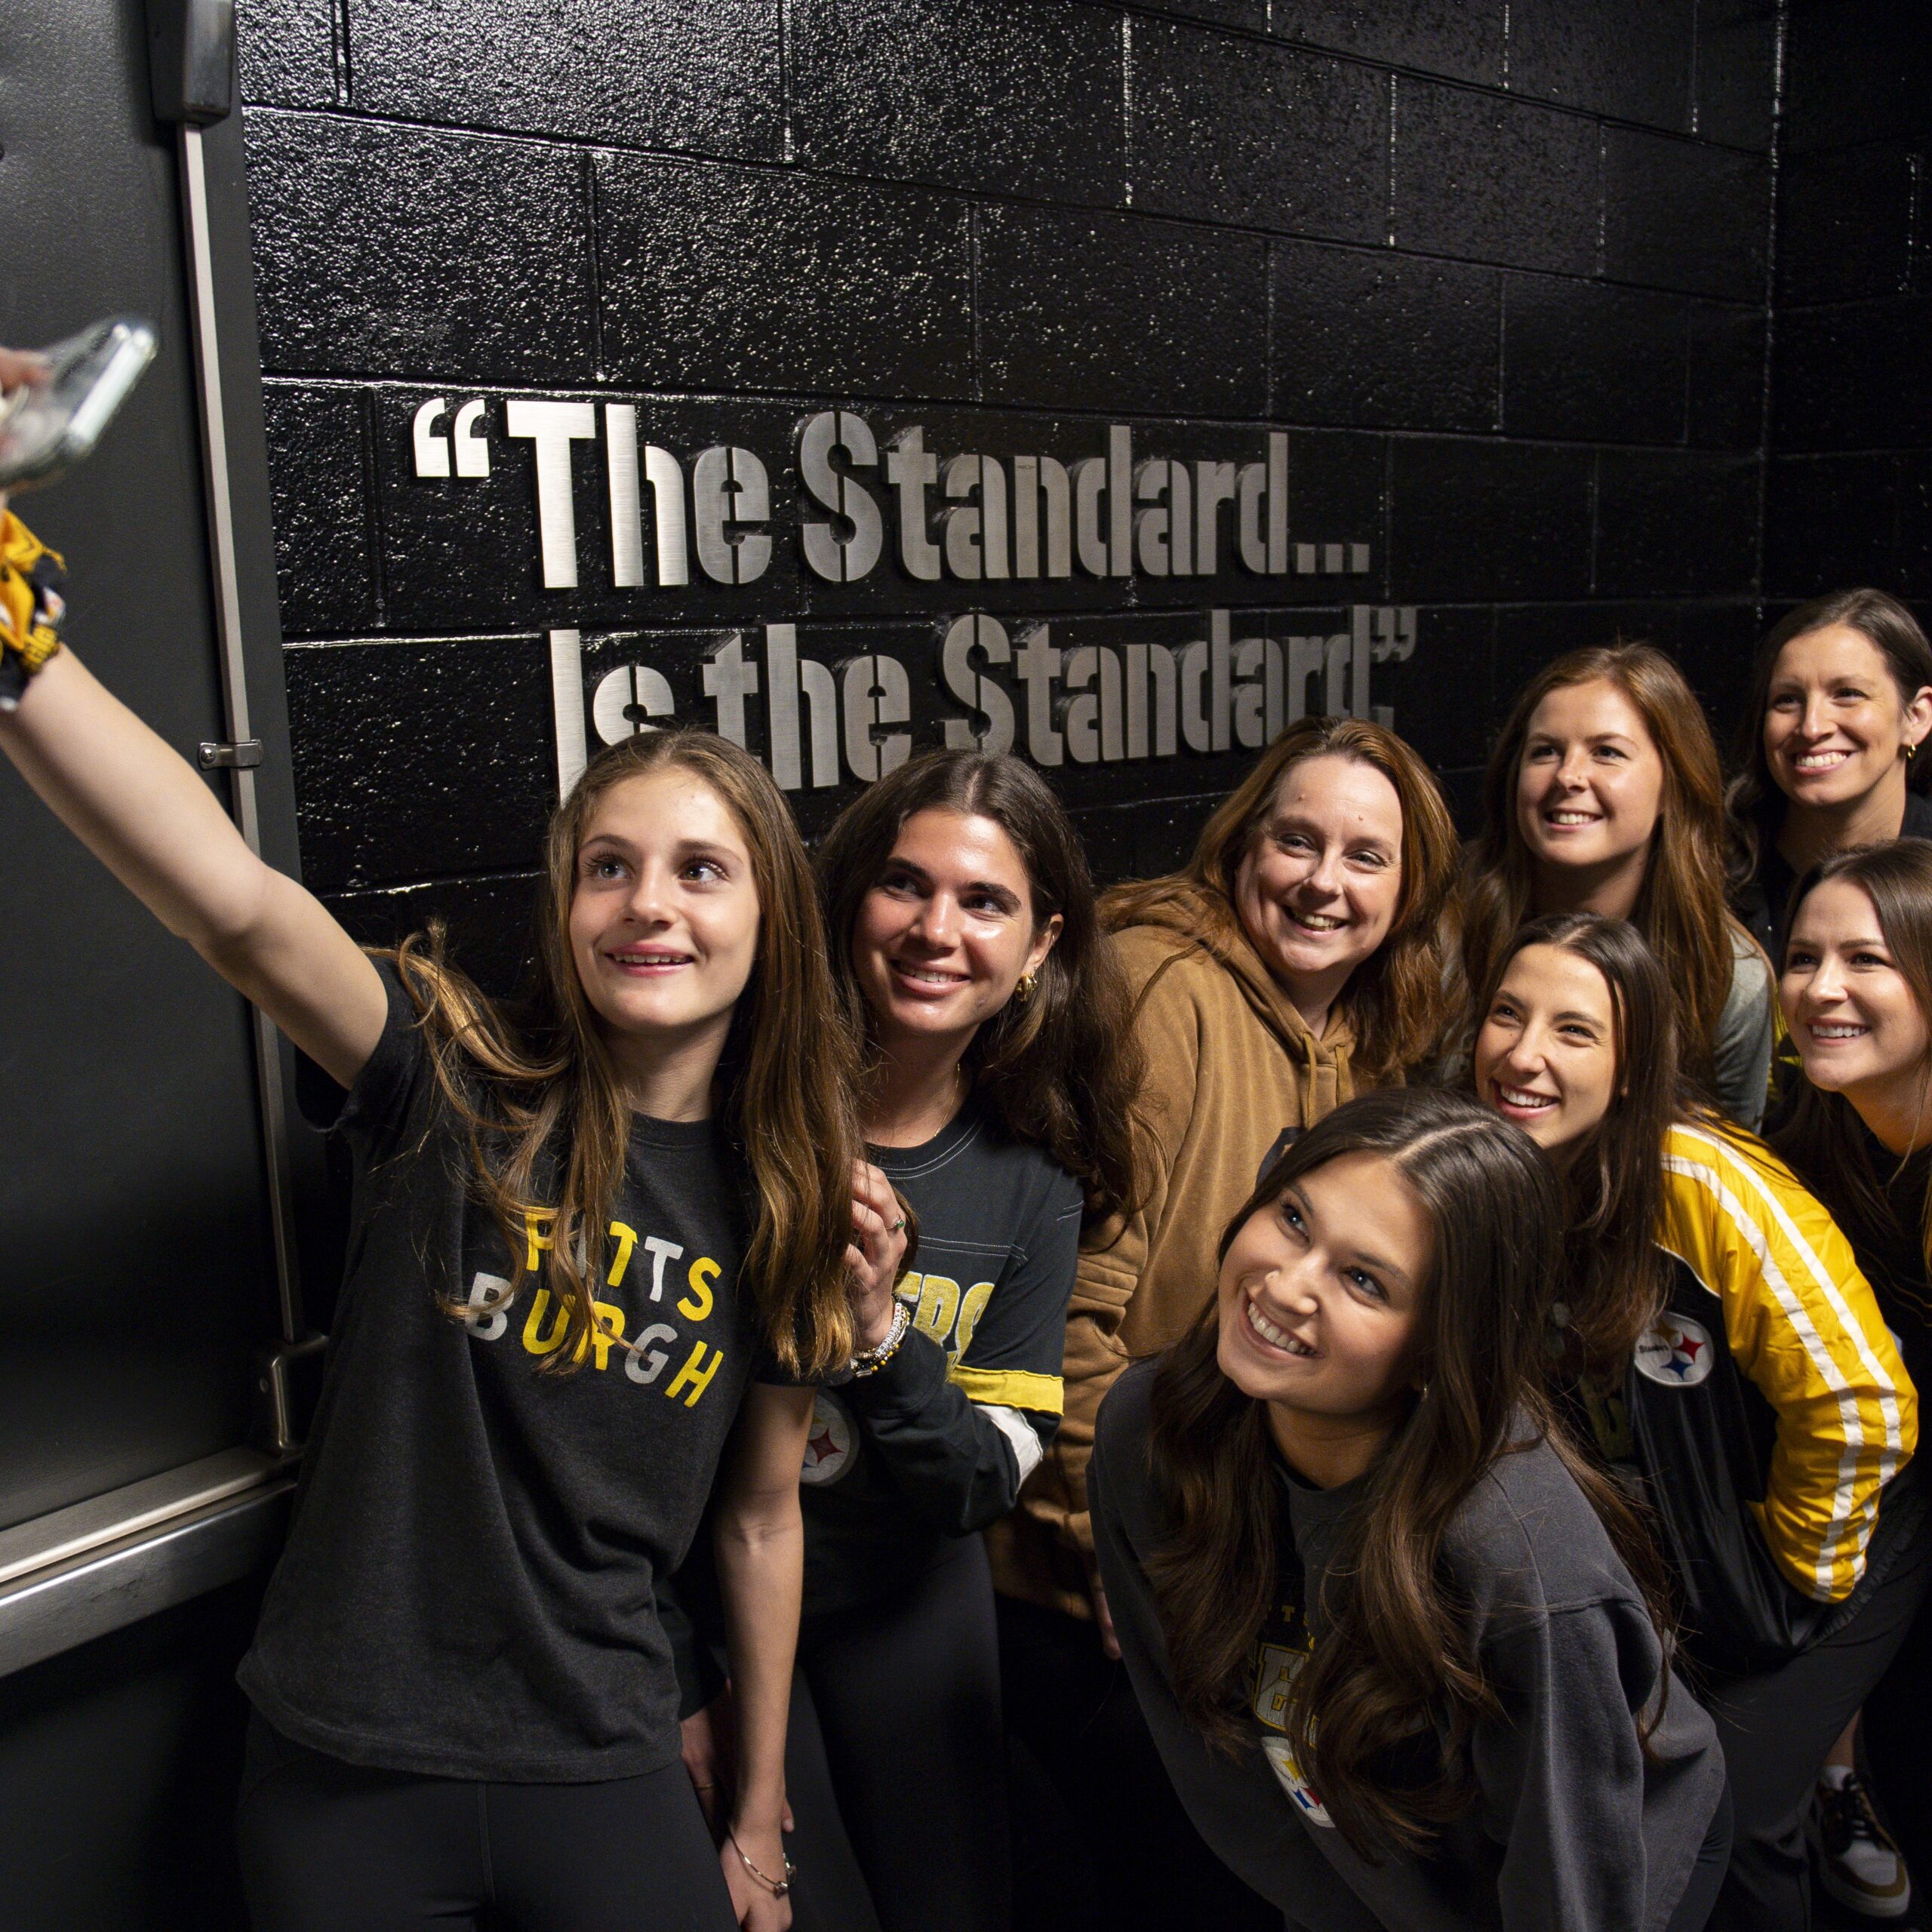 A photo of women posing together for a selfie outside the Steelers locker room.